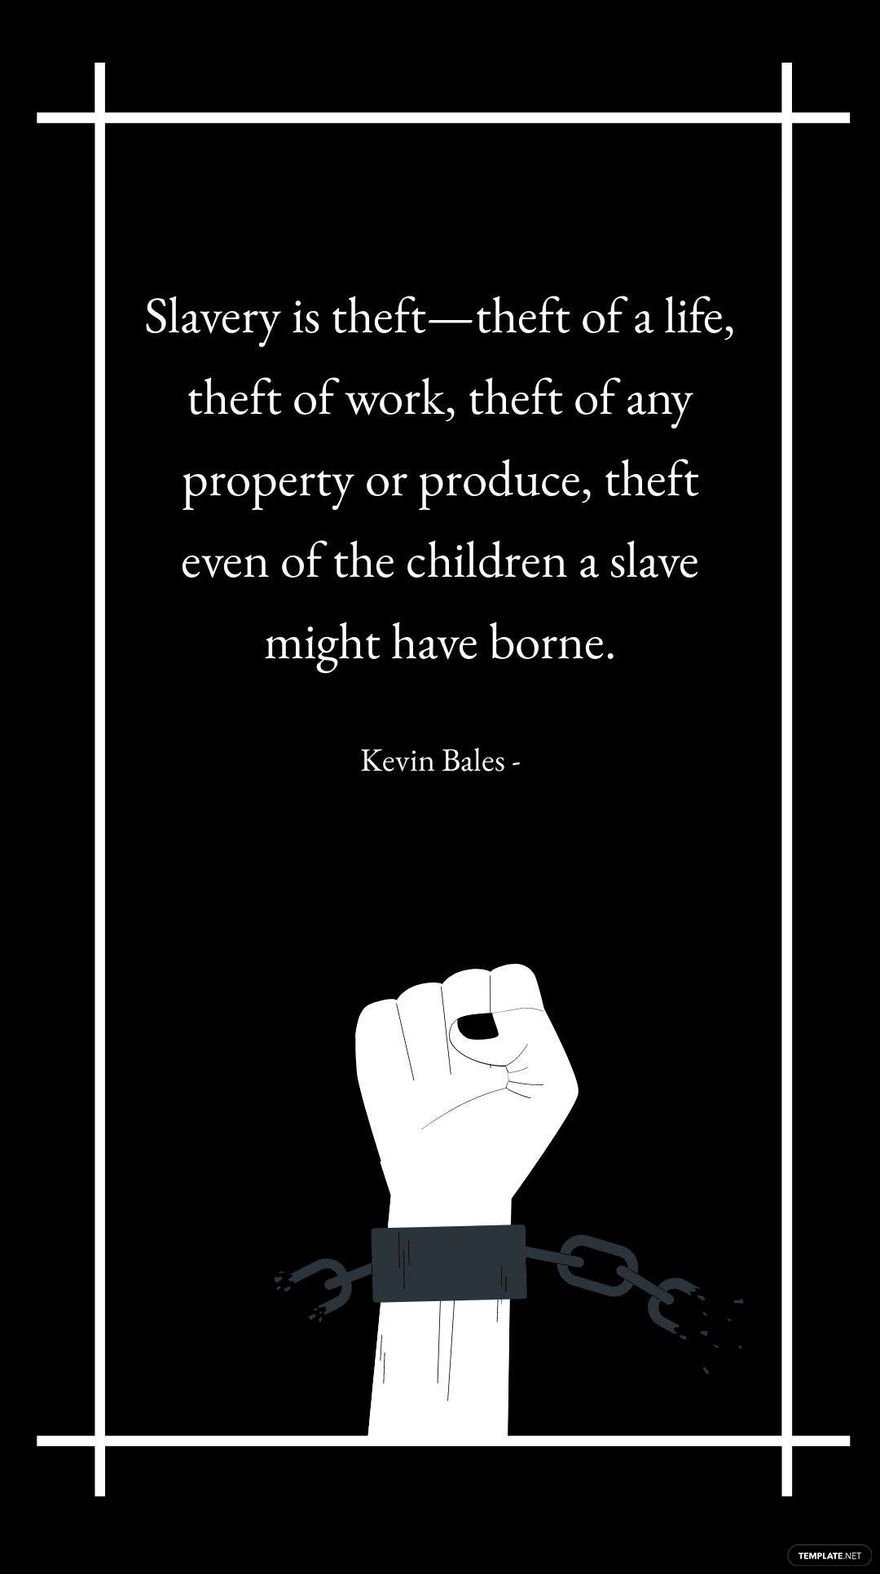 Free Kevin Bales - Slavery is theft—theft of a life, theft of work, theft of any property or produce, theft even of the children a slave might have borne. in JPG